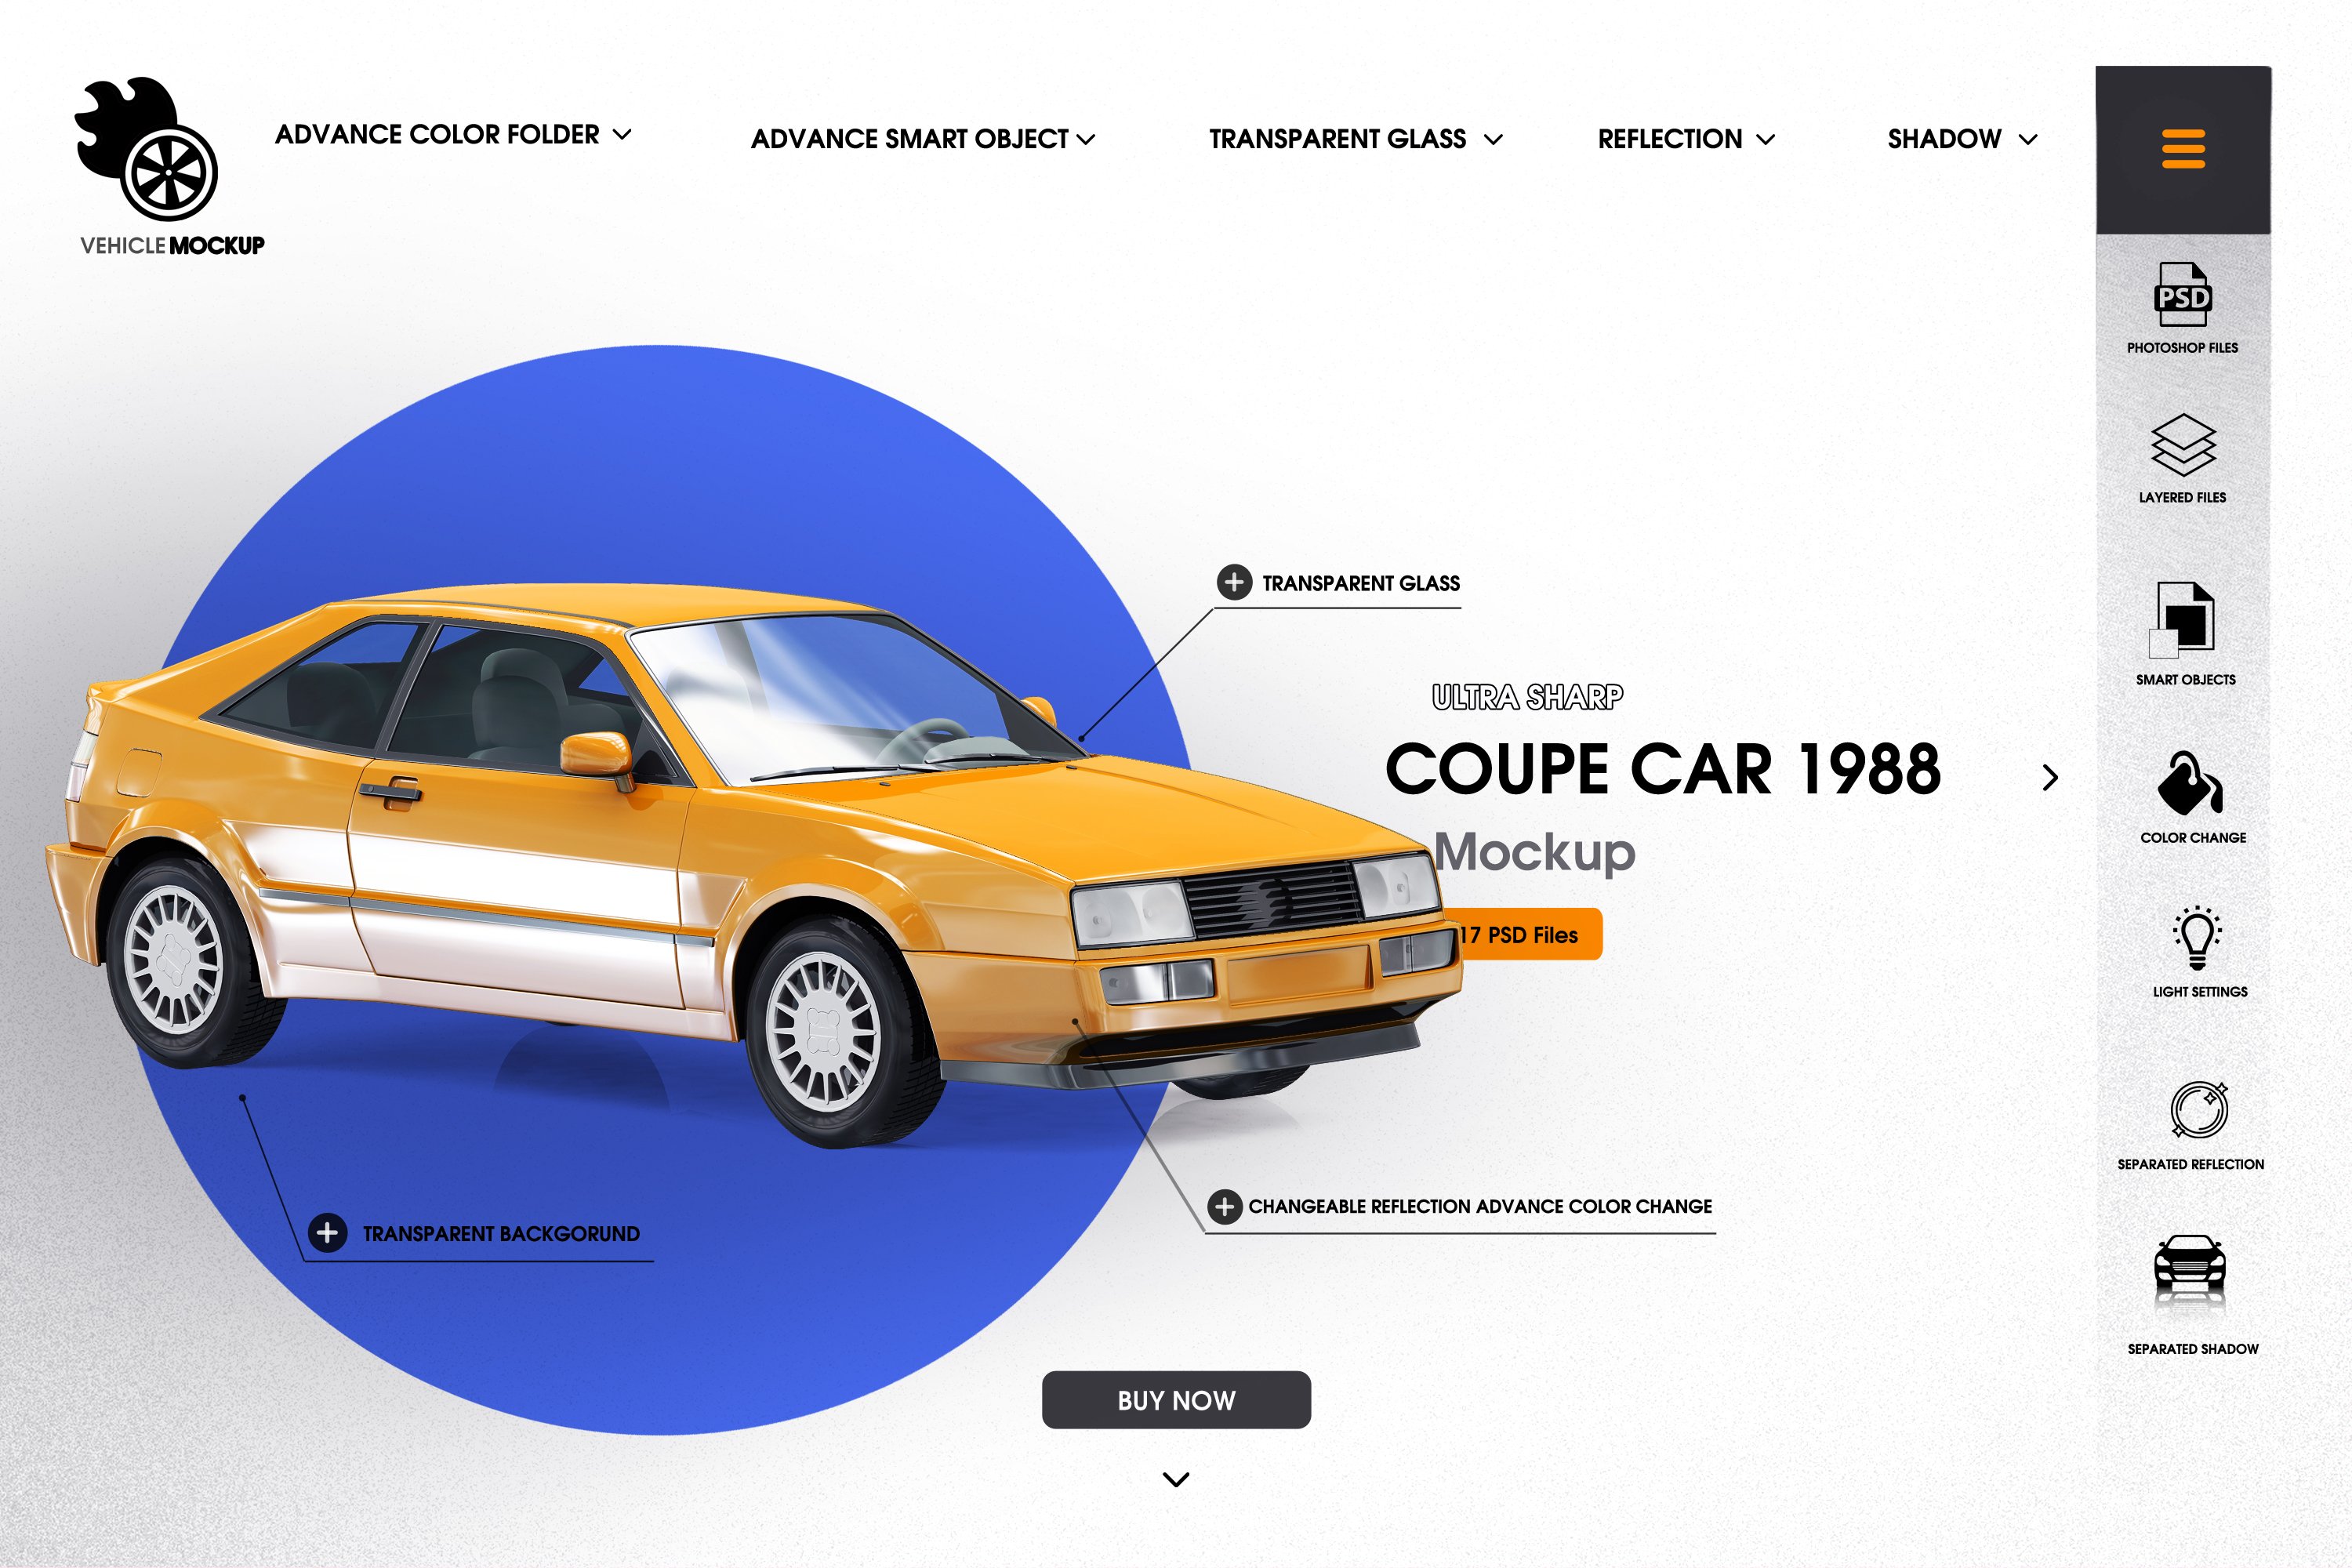 Coupe car 1988 mock up cover image.